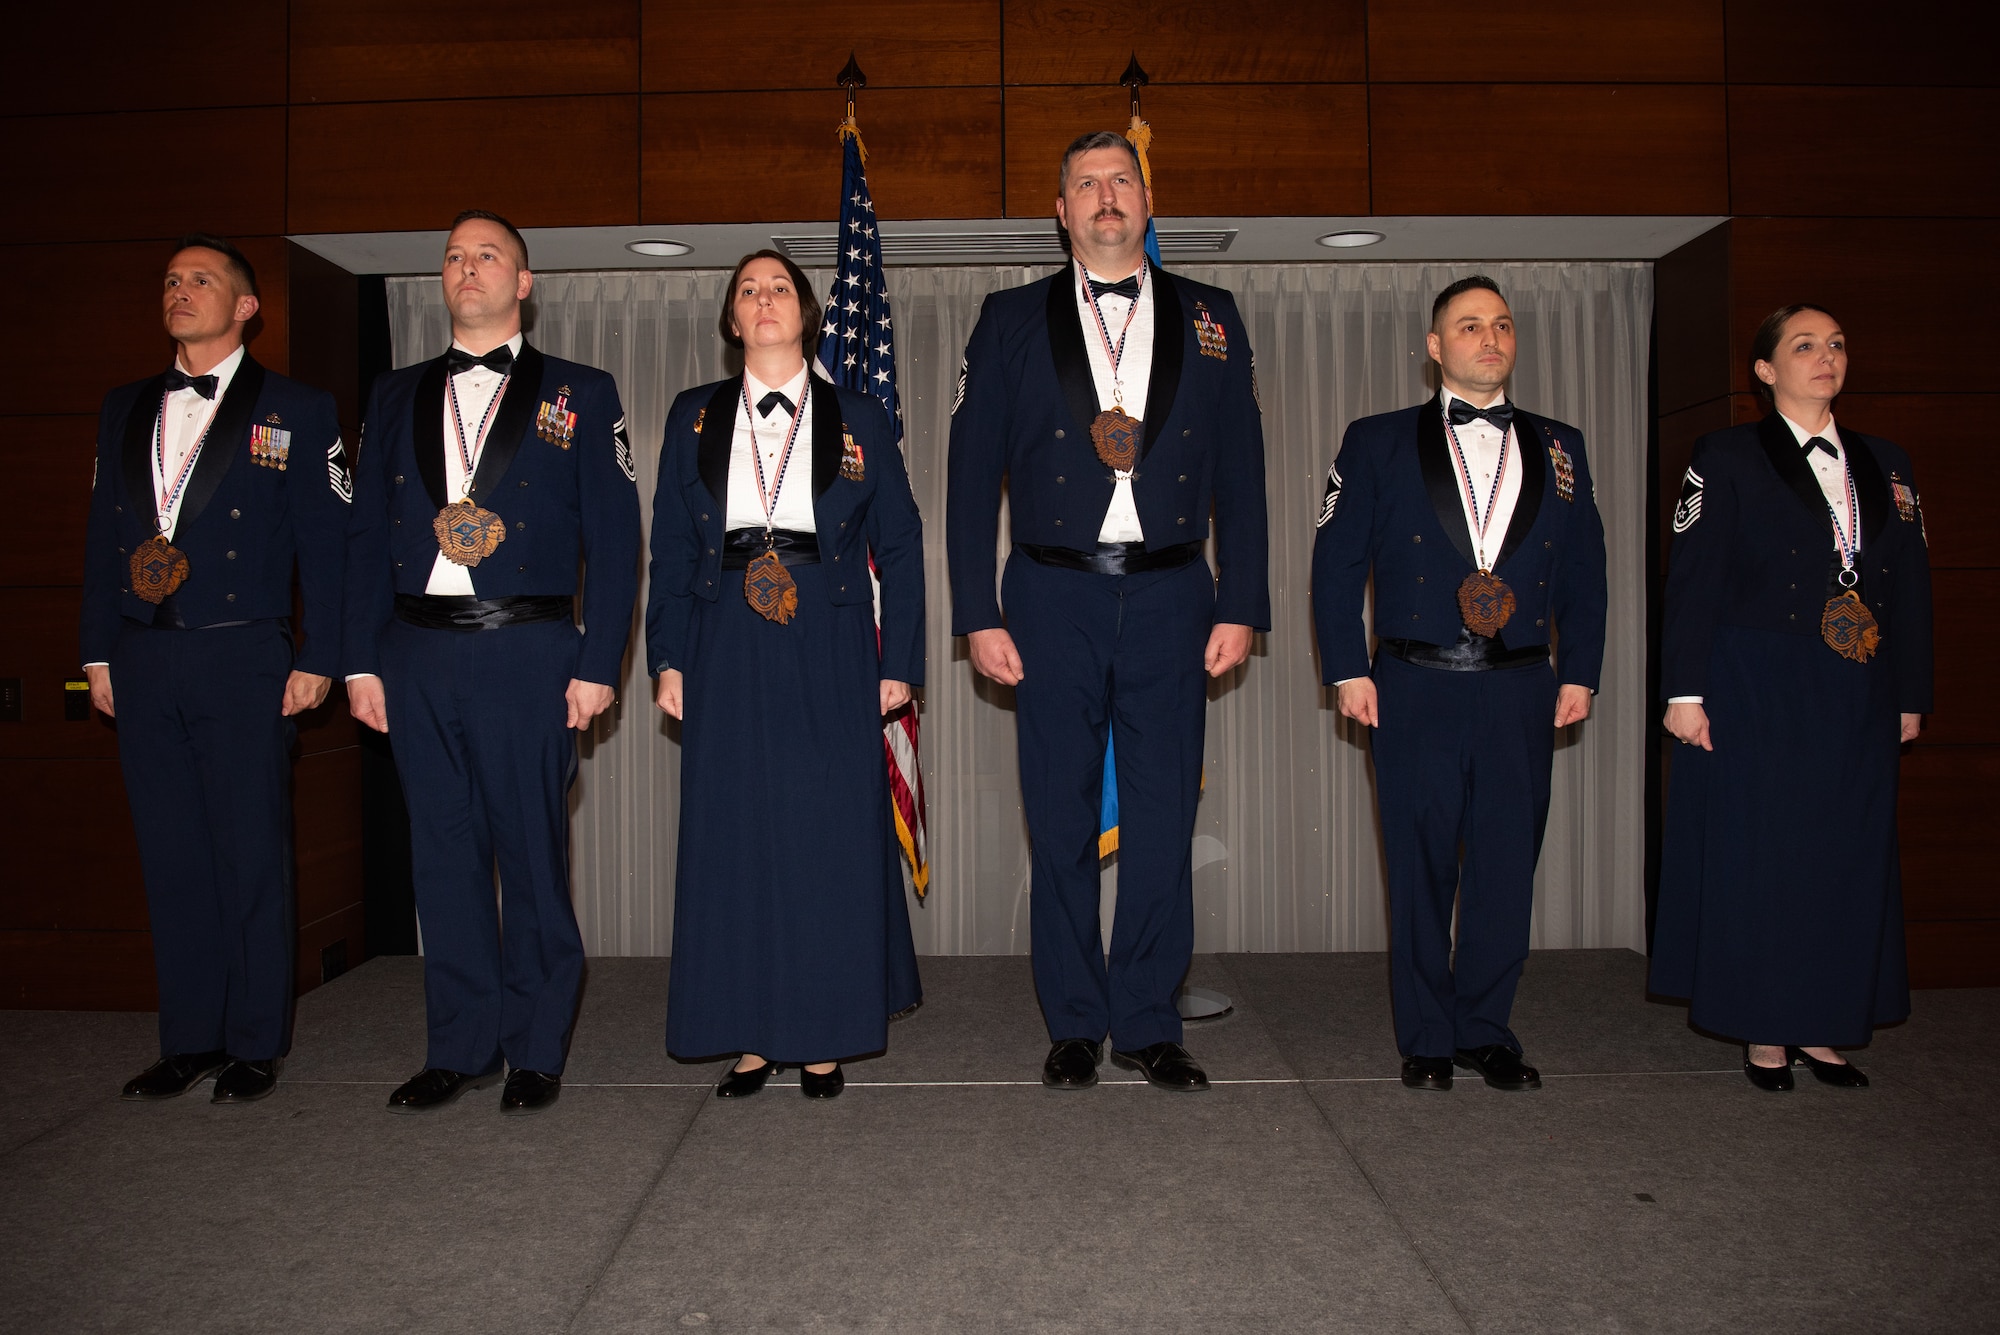 Chief master sergeants hold strategic leadership positions with tremendous influence at all levels of the Air Force, and continue to develop personal leadership and management skills.